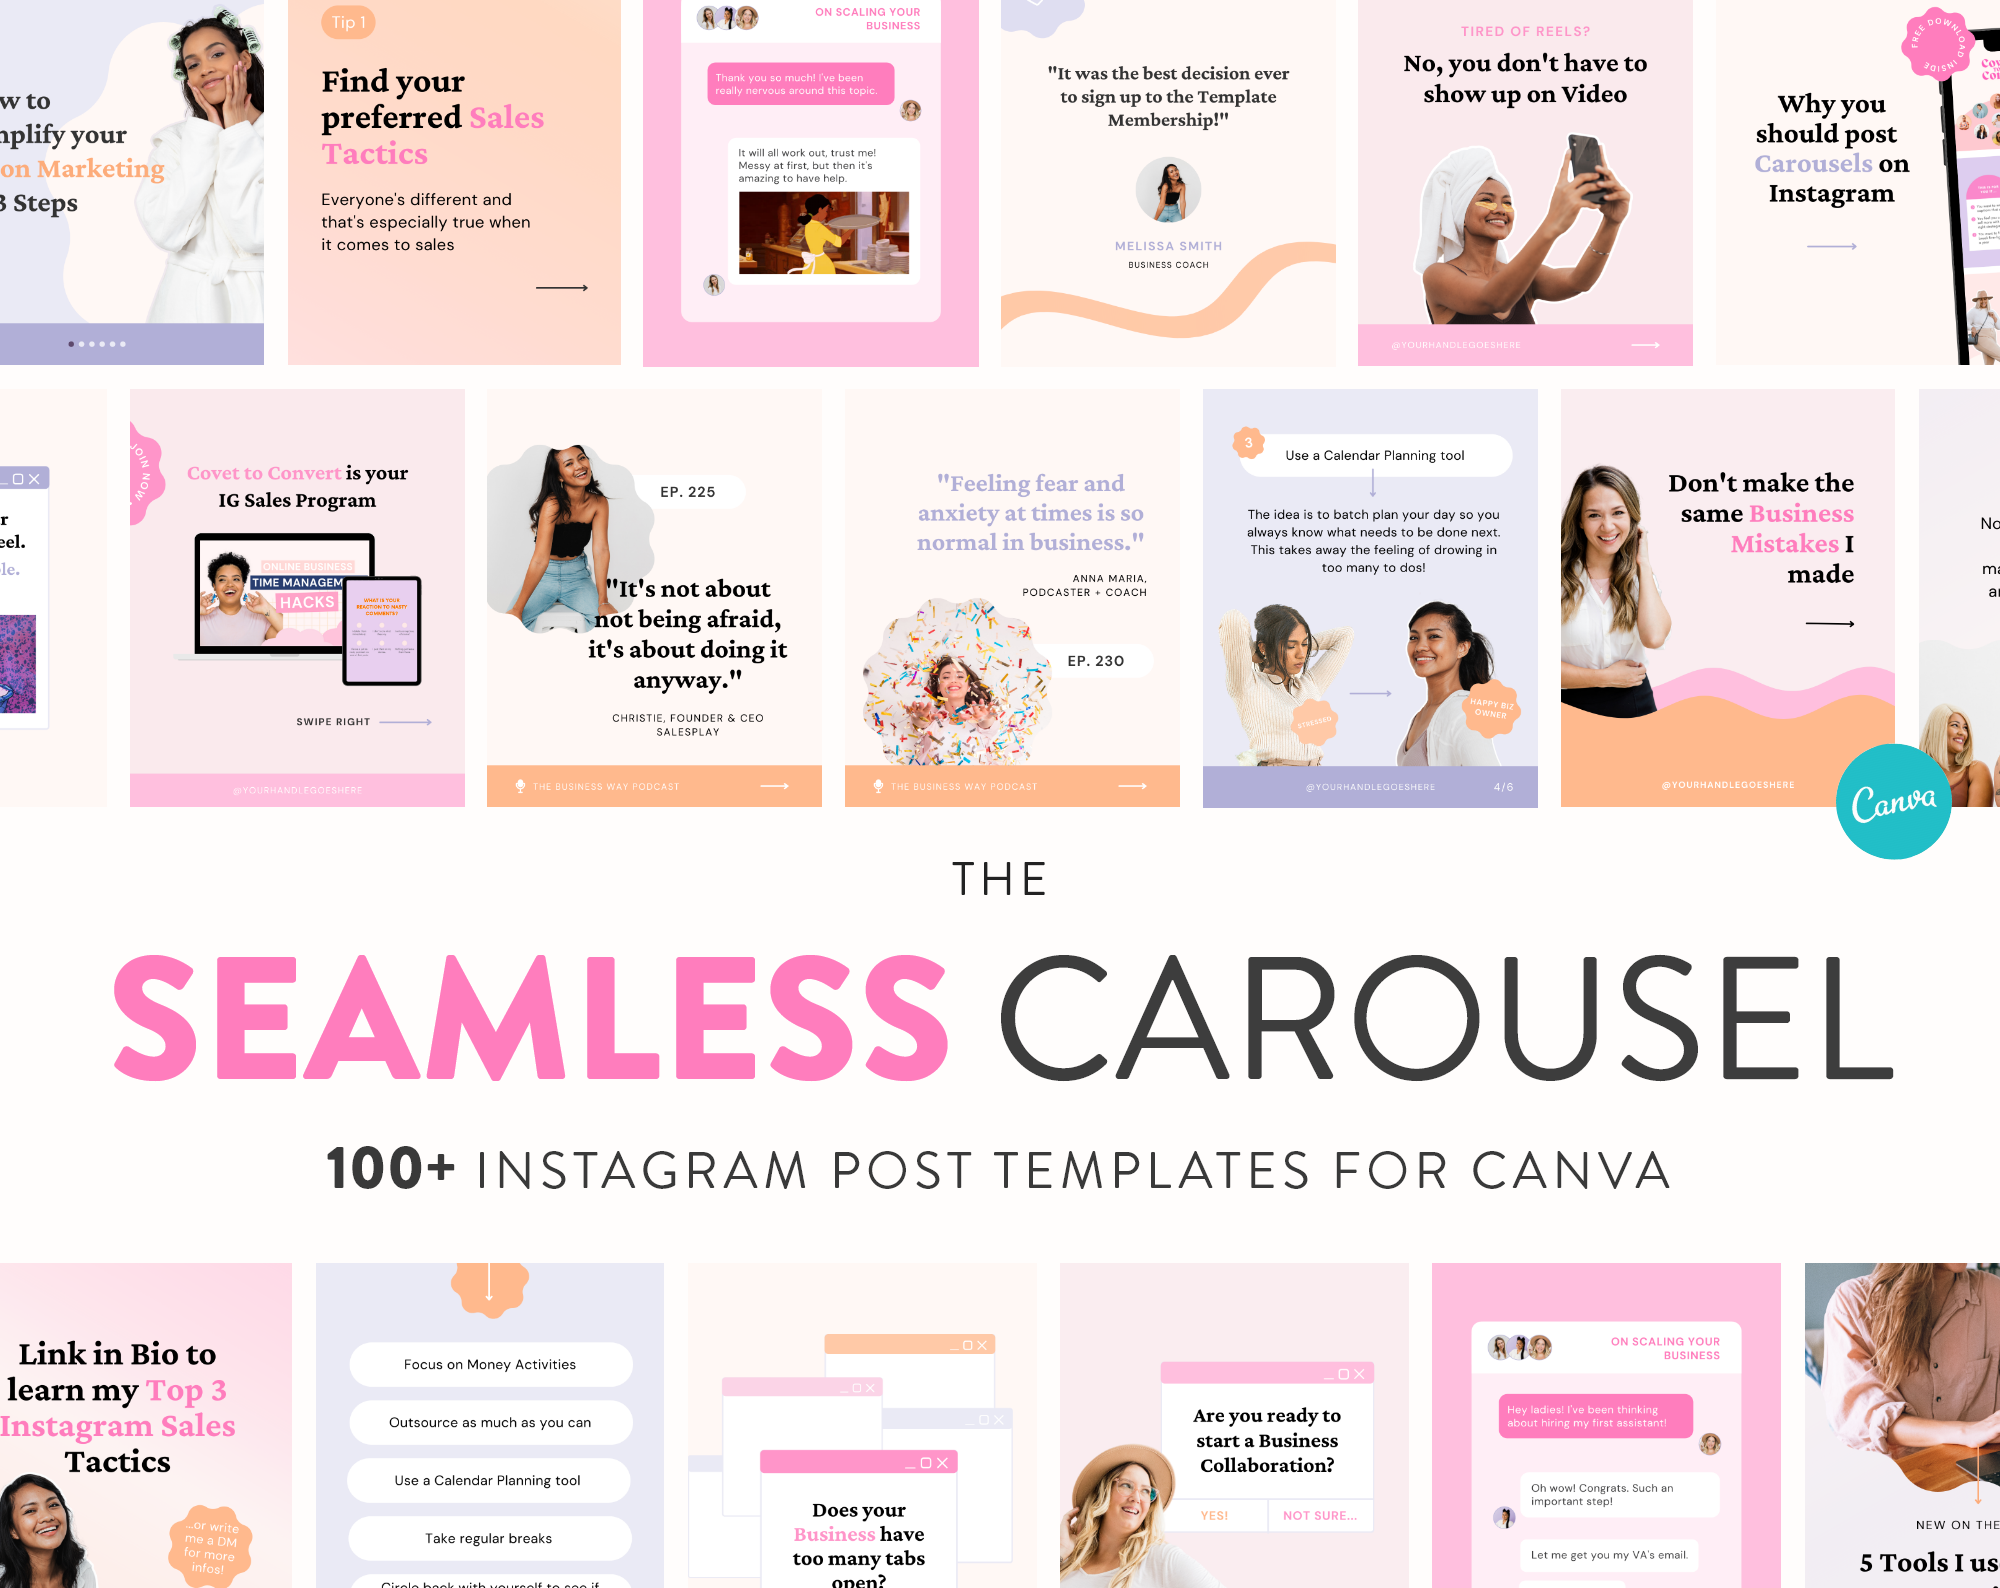 Click here to discover over 100 Canva templates for carousels, ready-to-use!